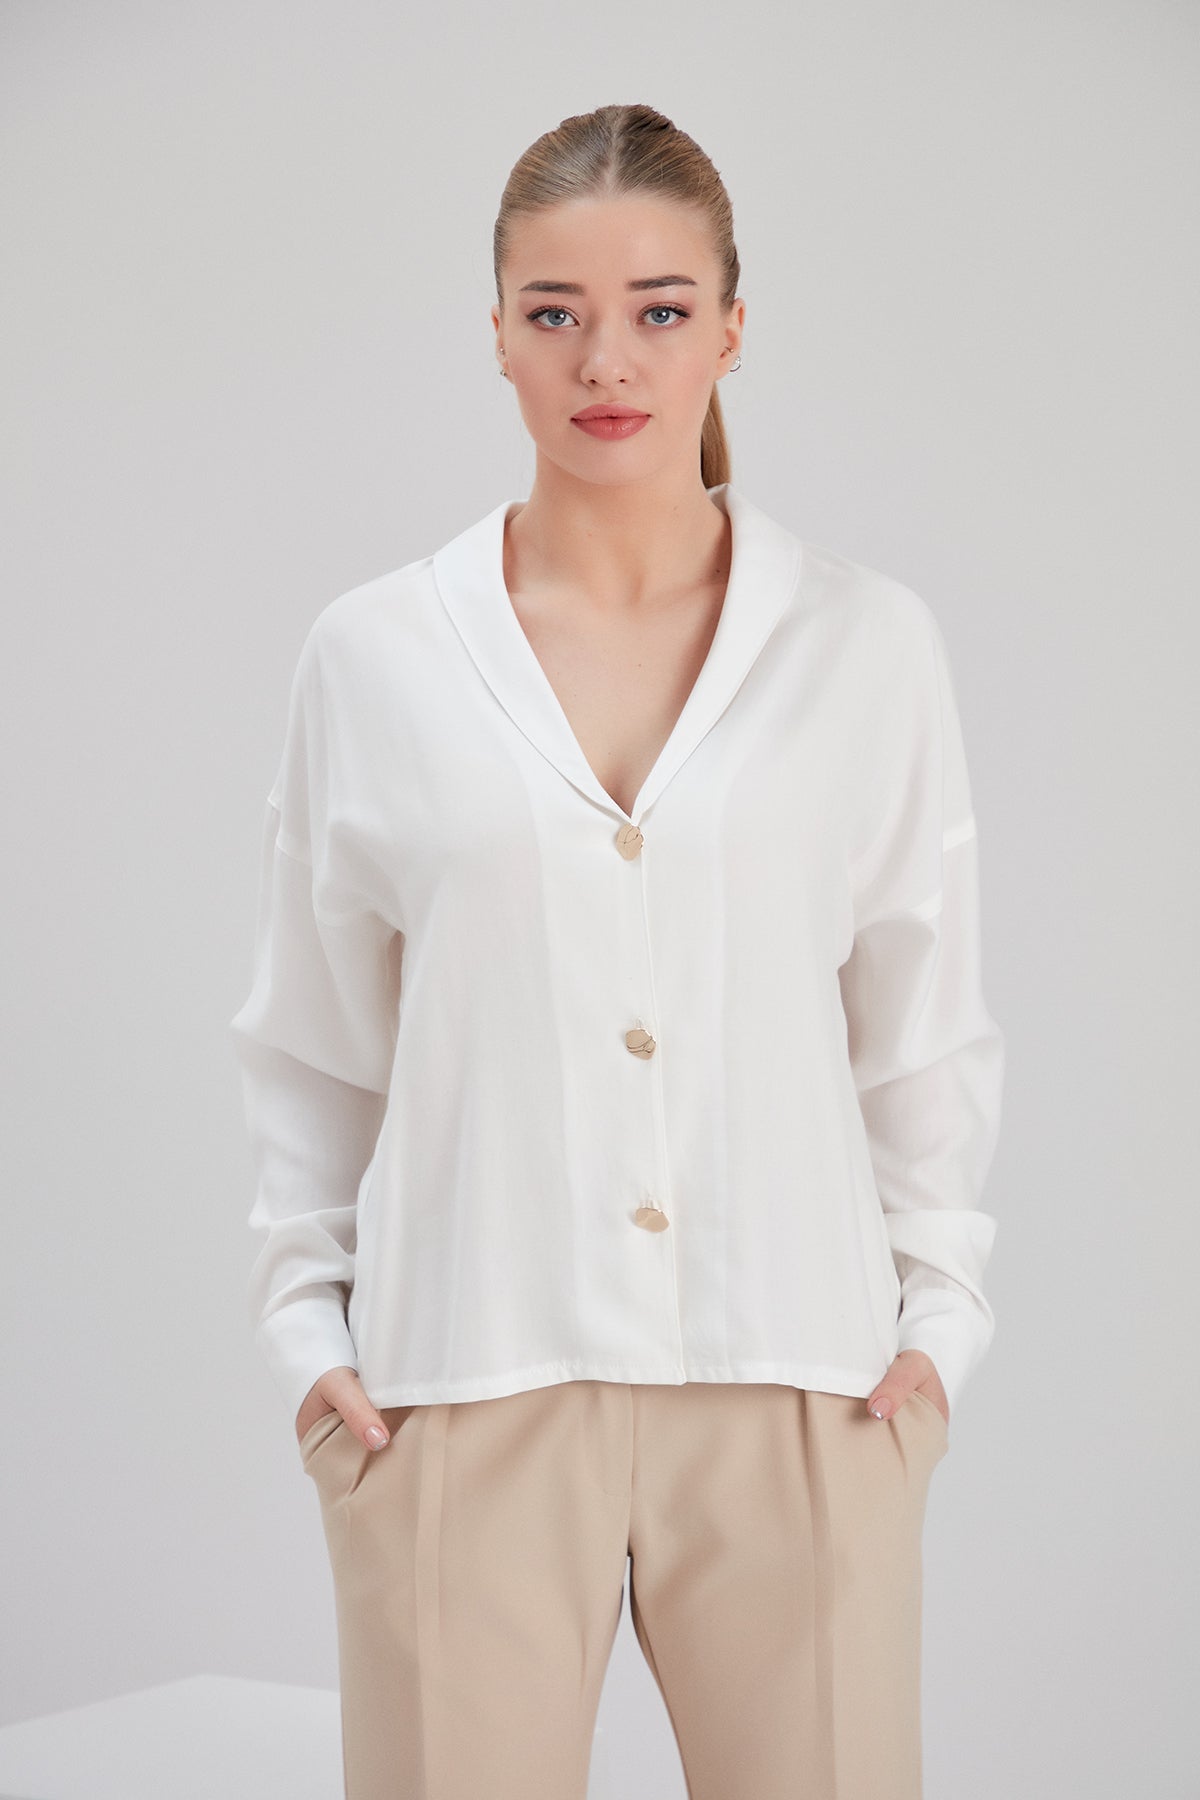 NOACODE high quality sustainable white Tencel blouse with elegant buttons for office wear for tall curvy women